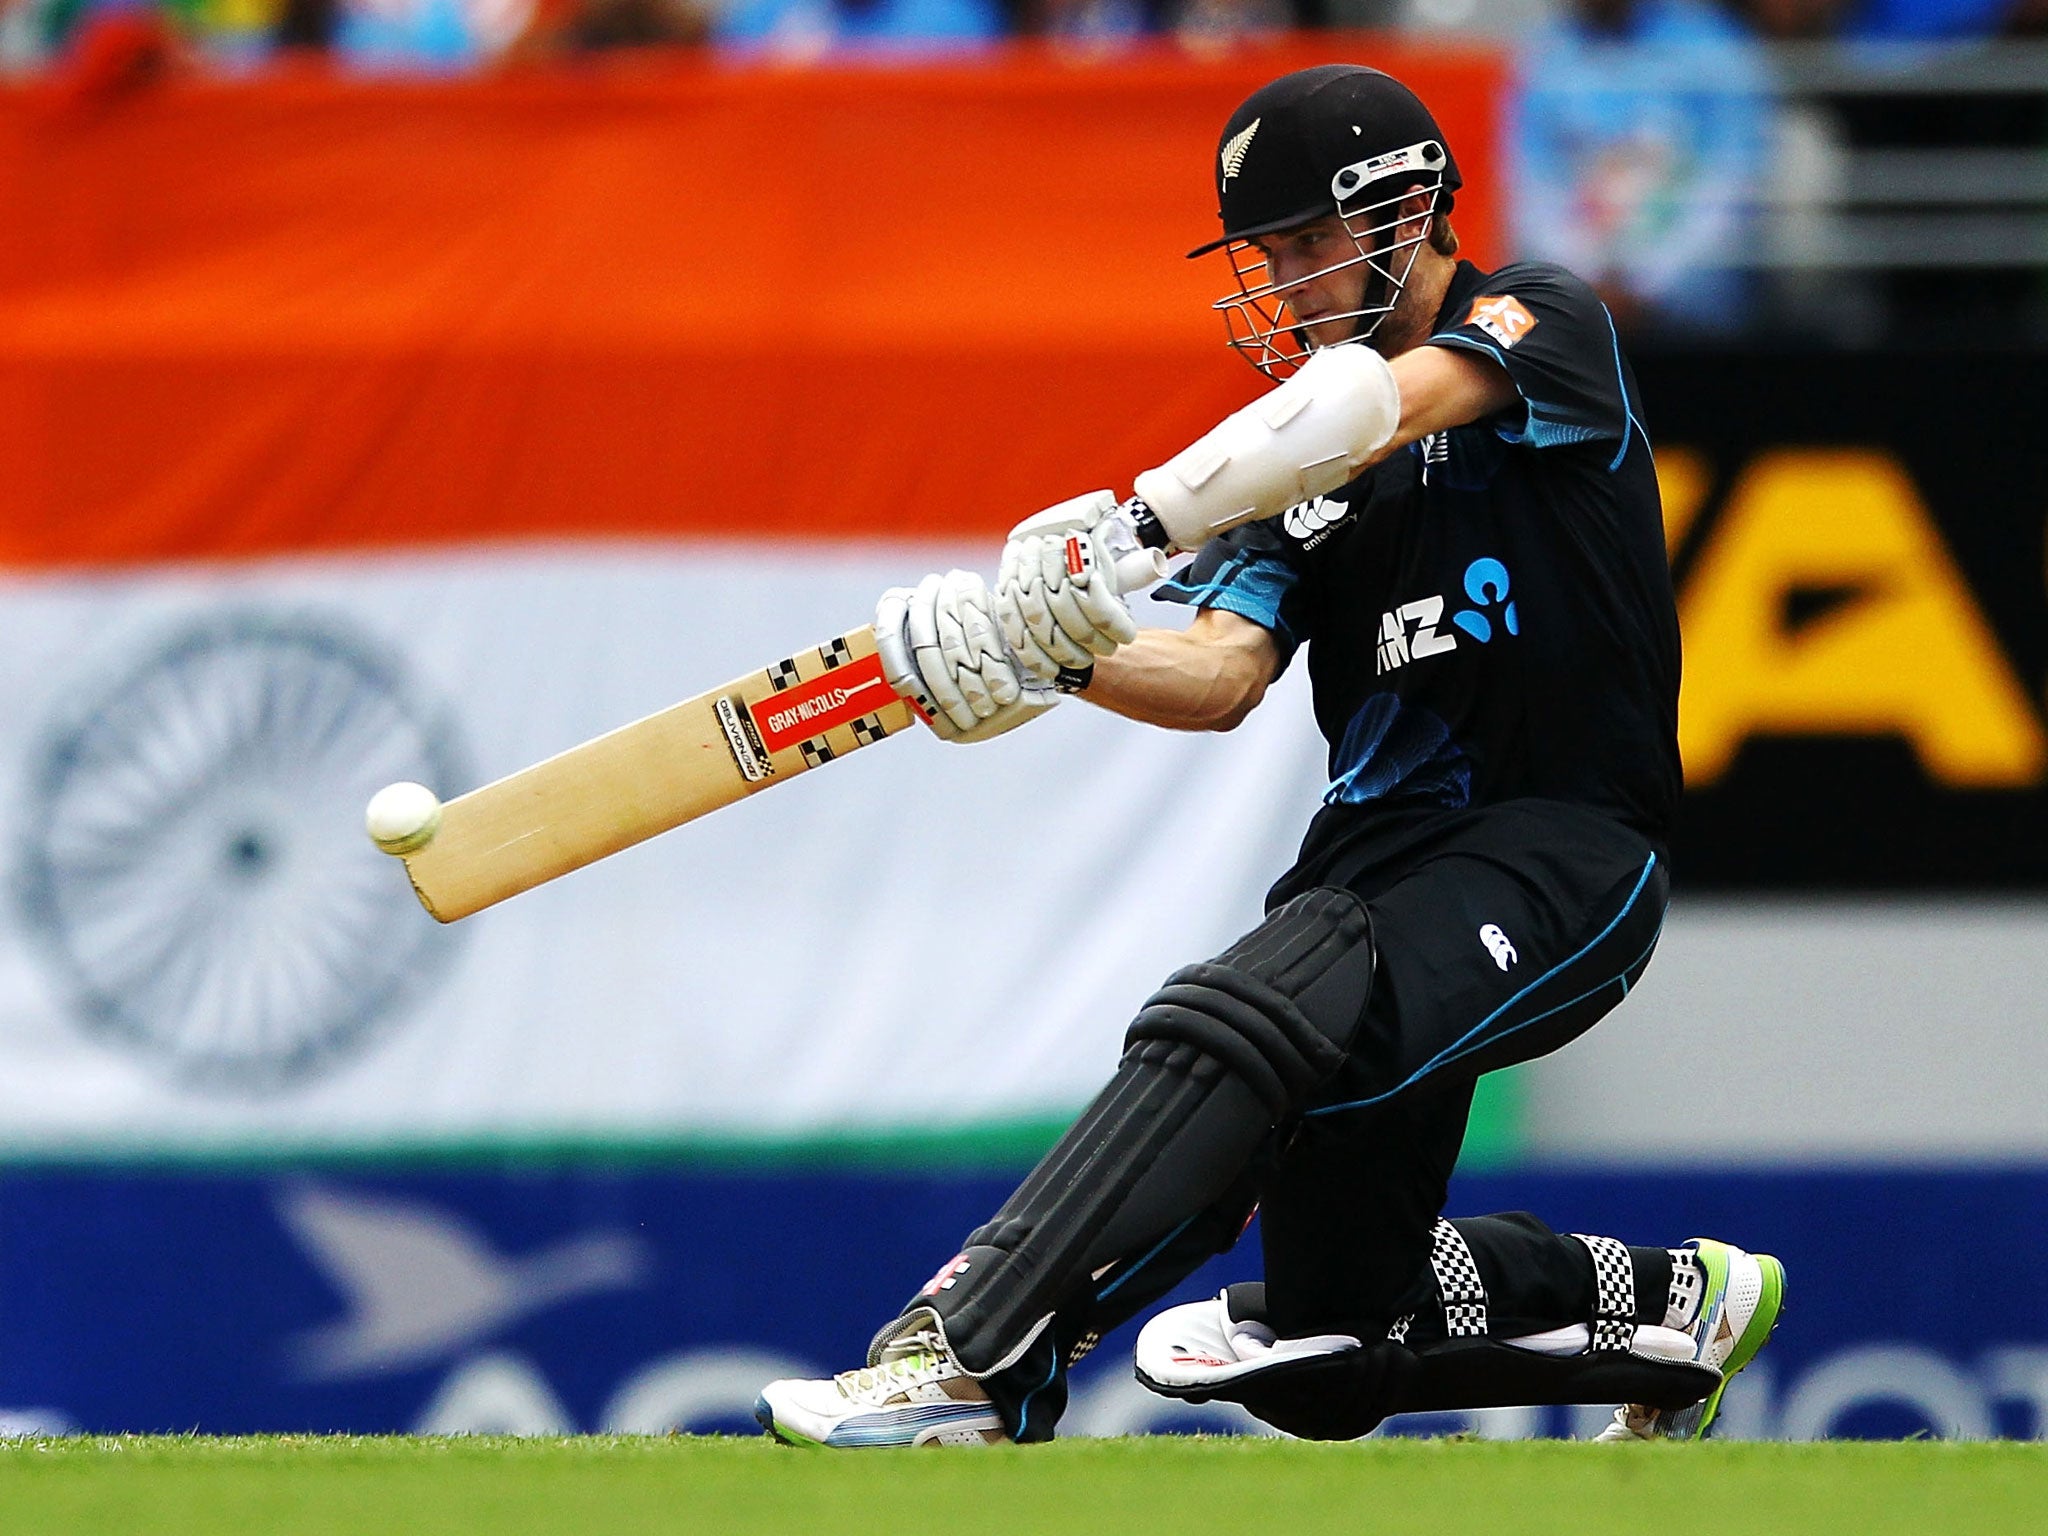 Kane Williamson is one of three big-name overseas stars signed by Yorkshire for 2015